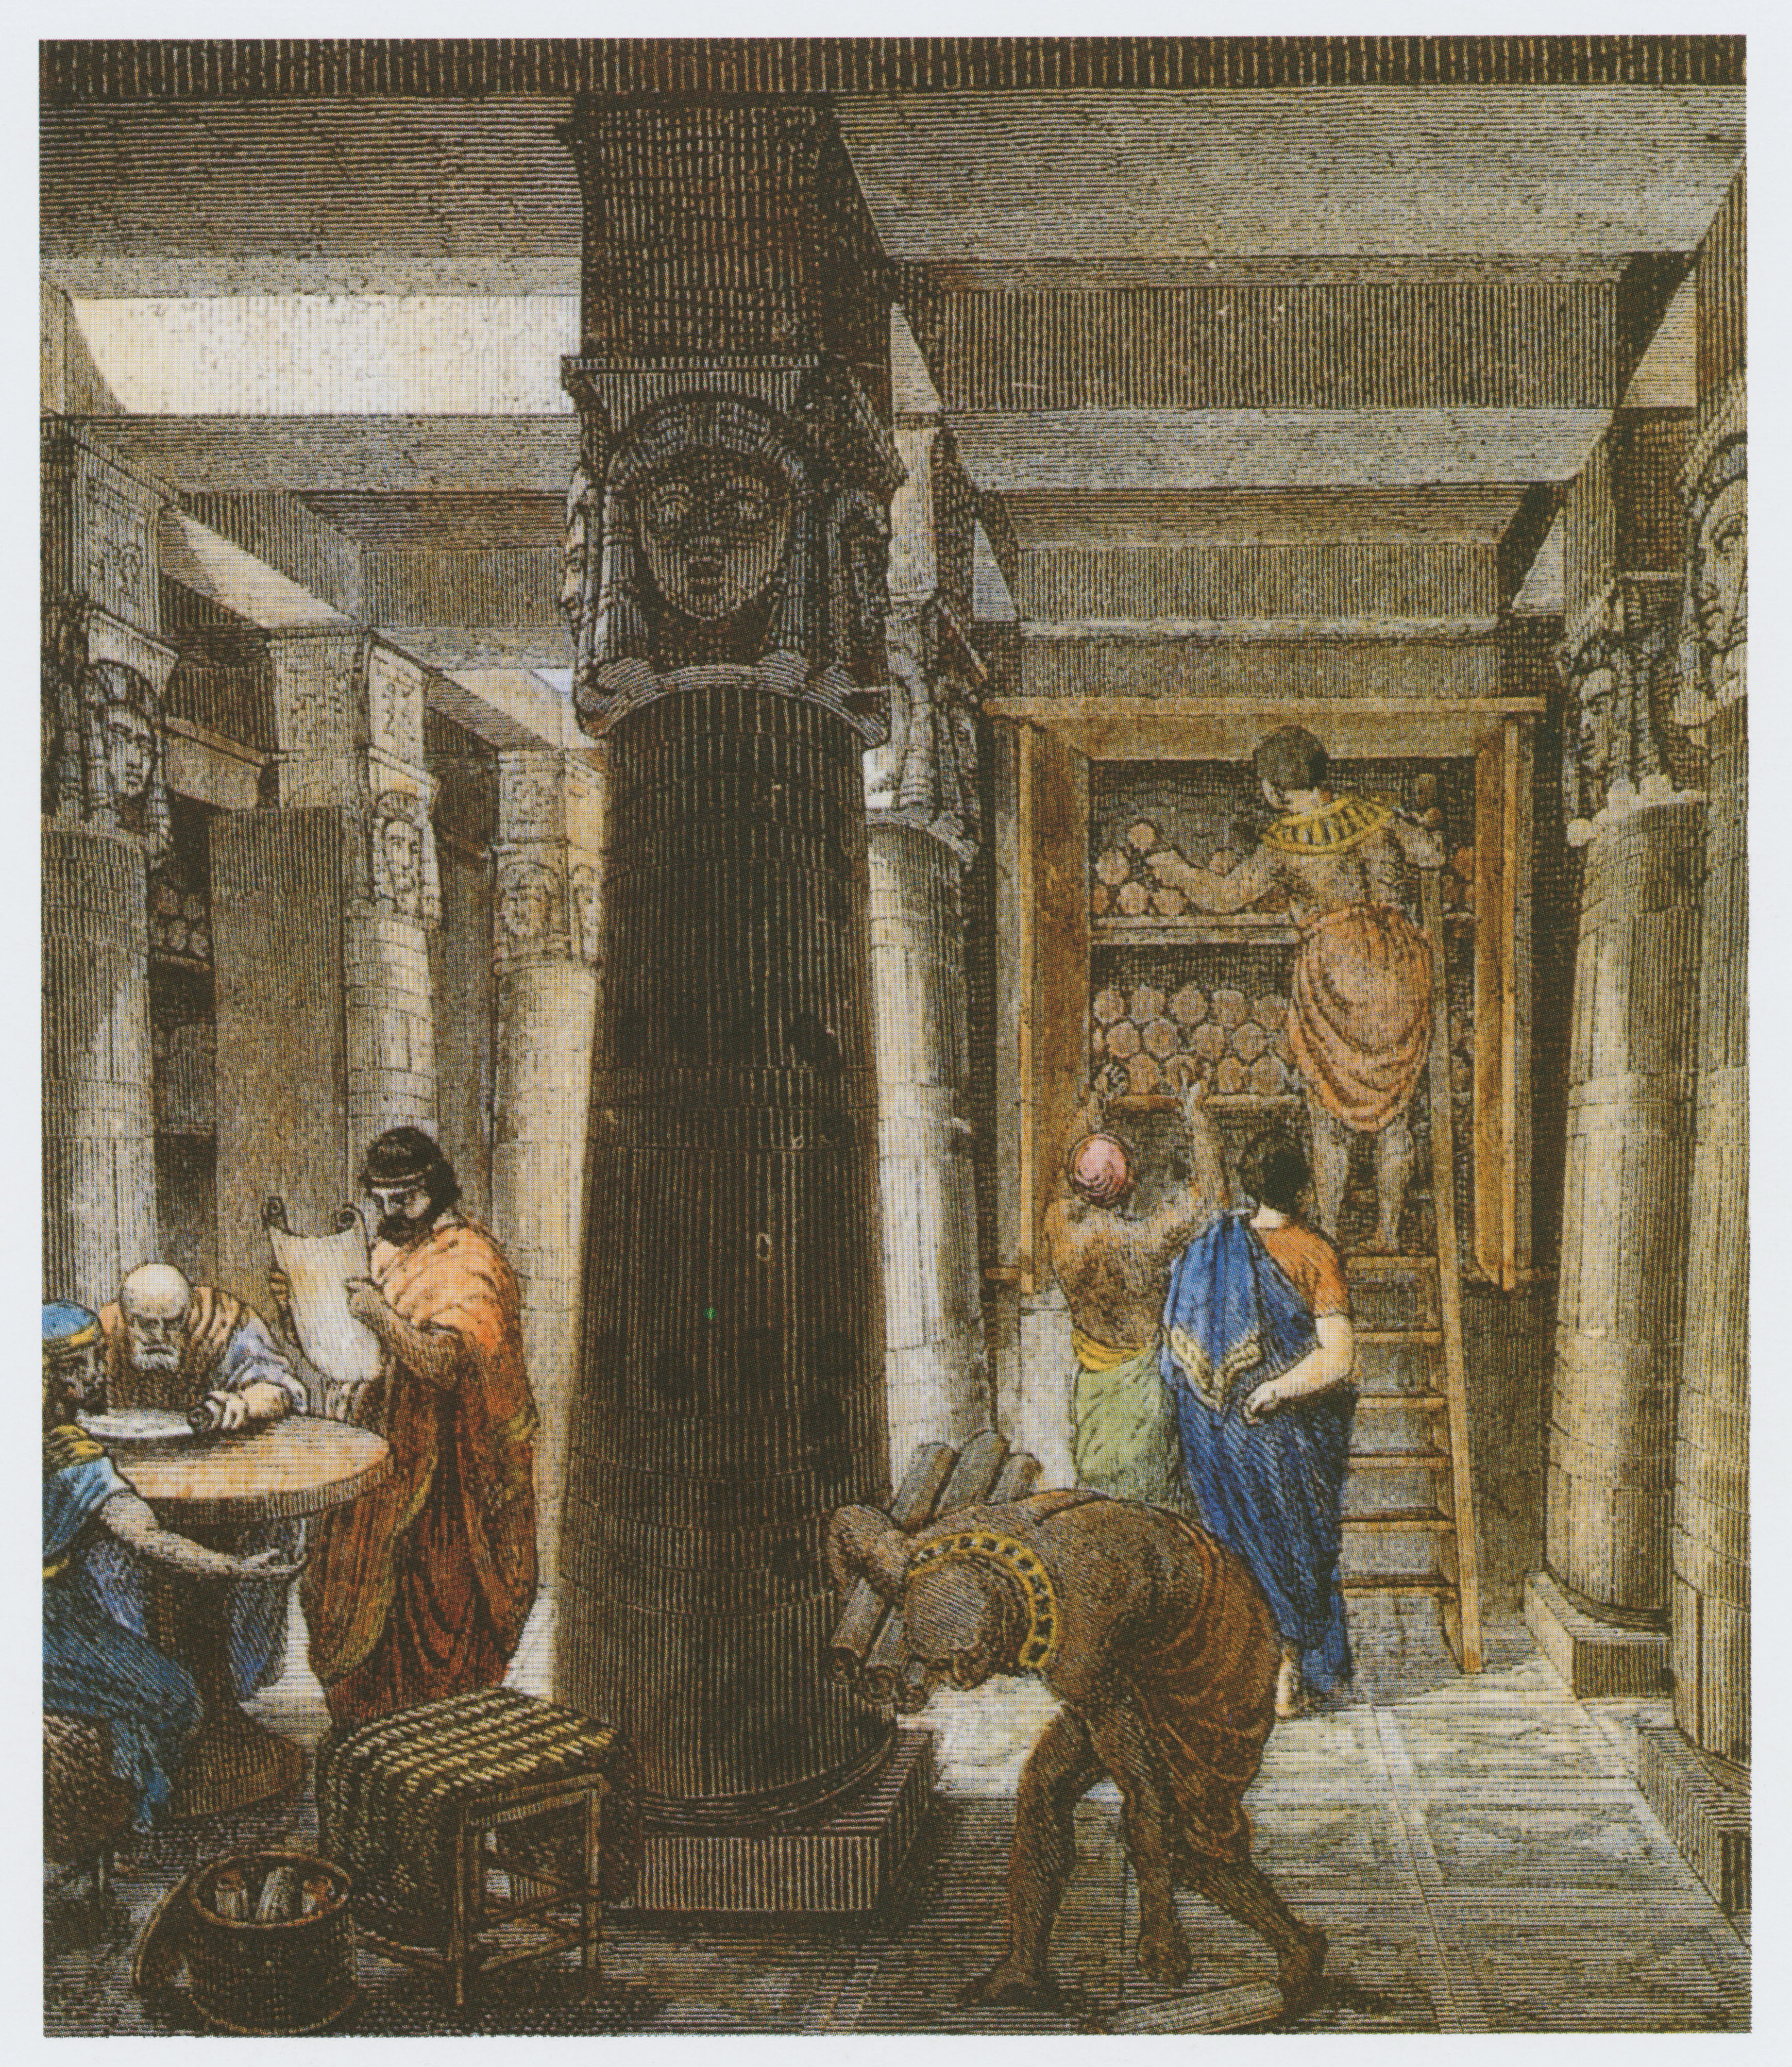 Artist rendering of the interior of the Library of Alexandria